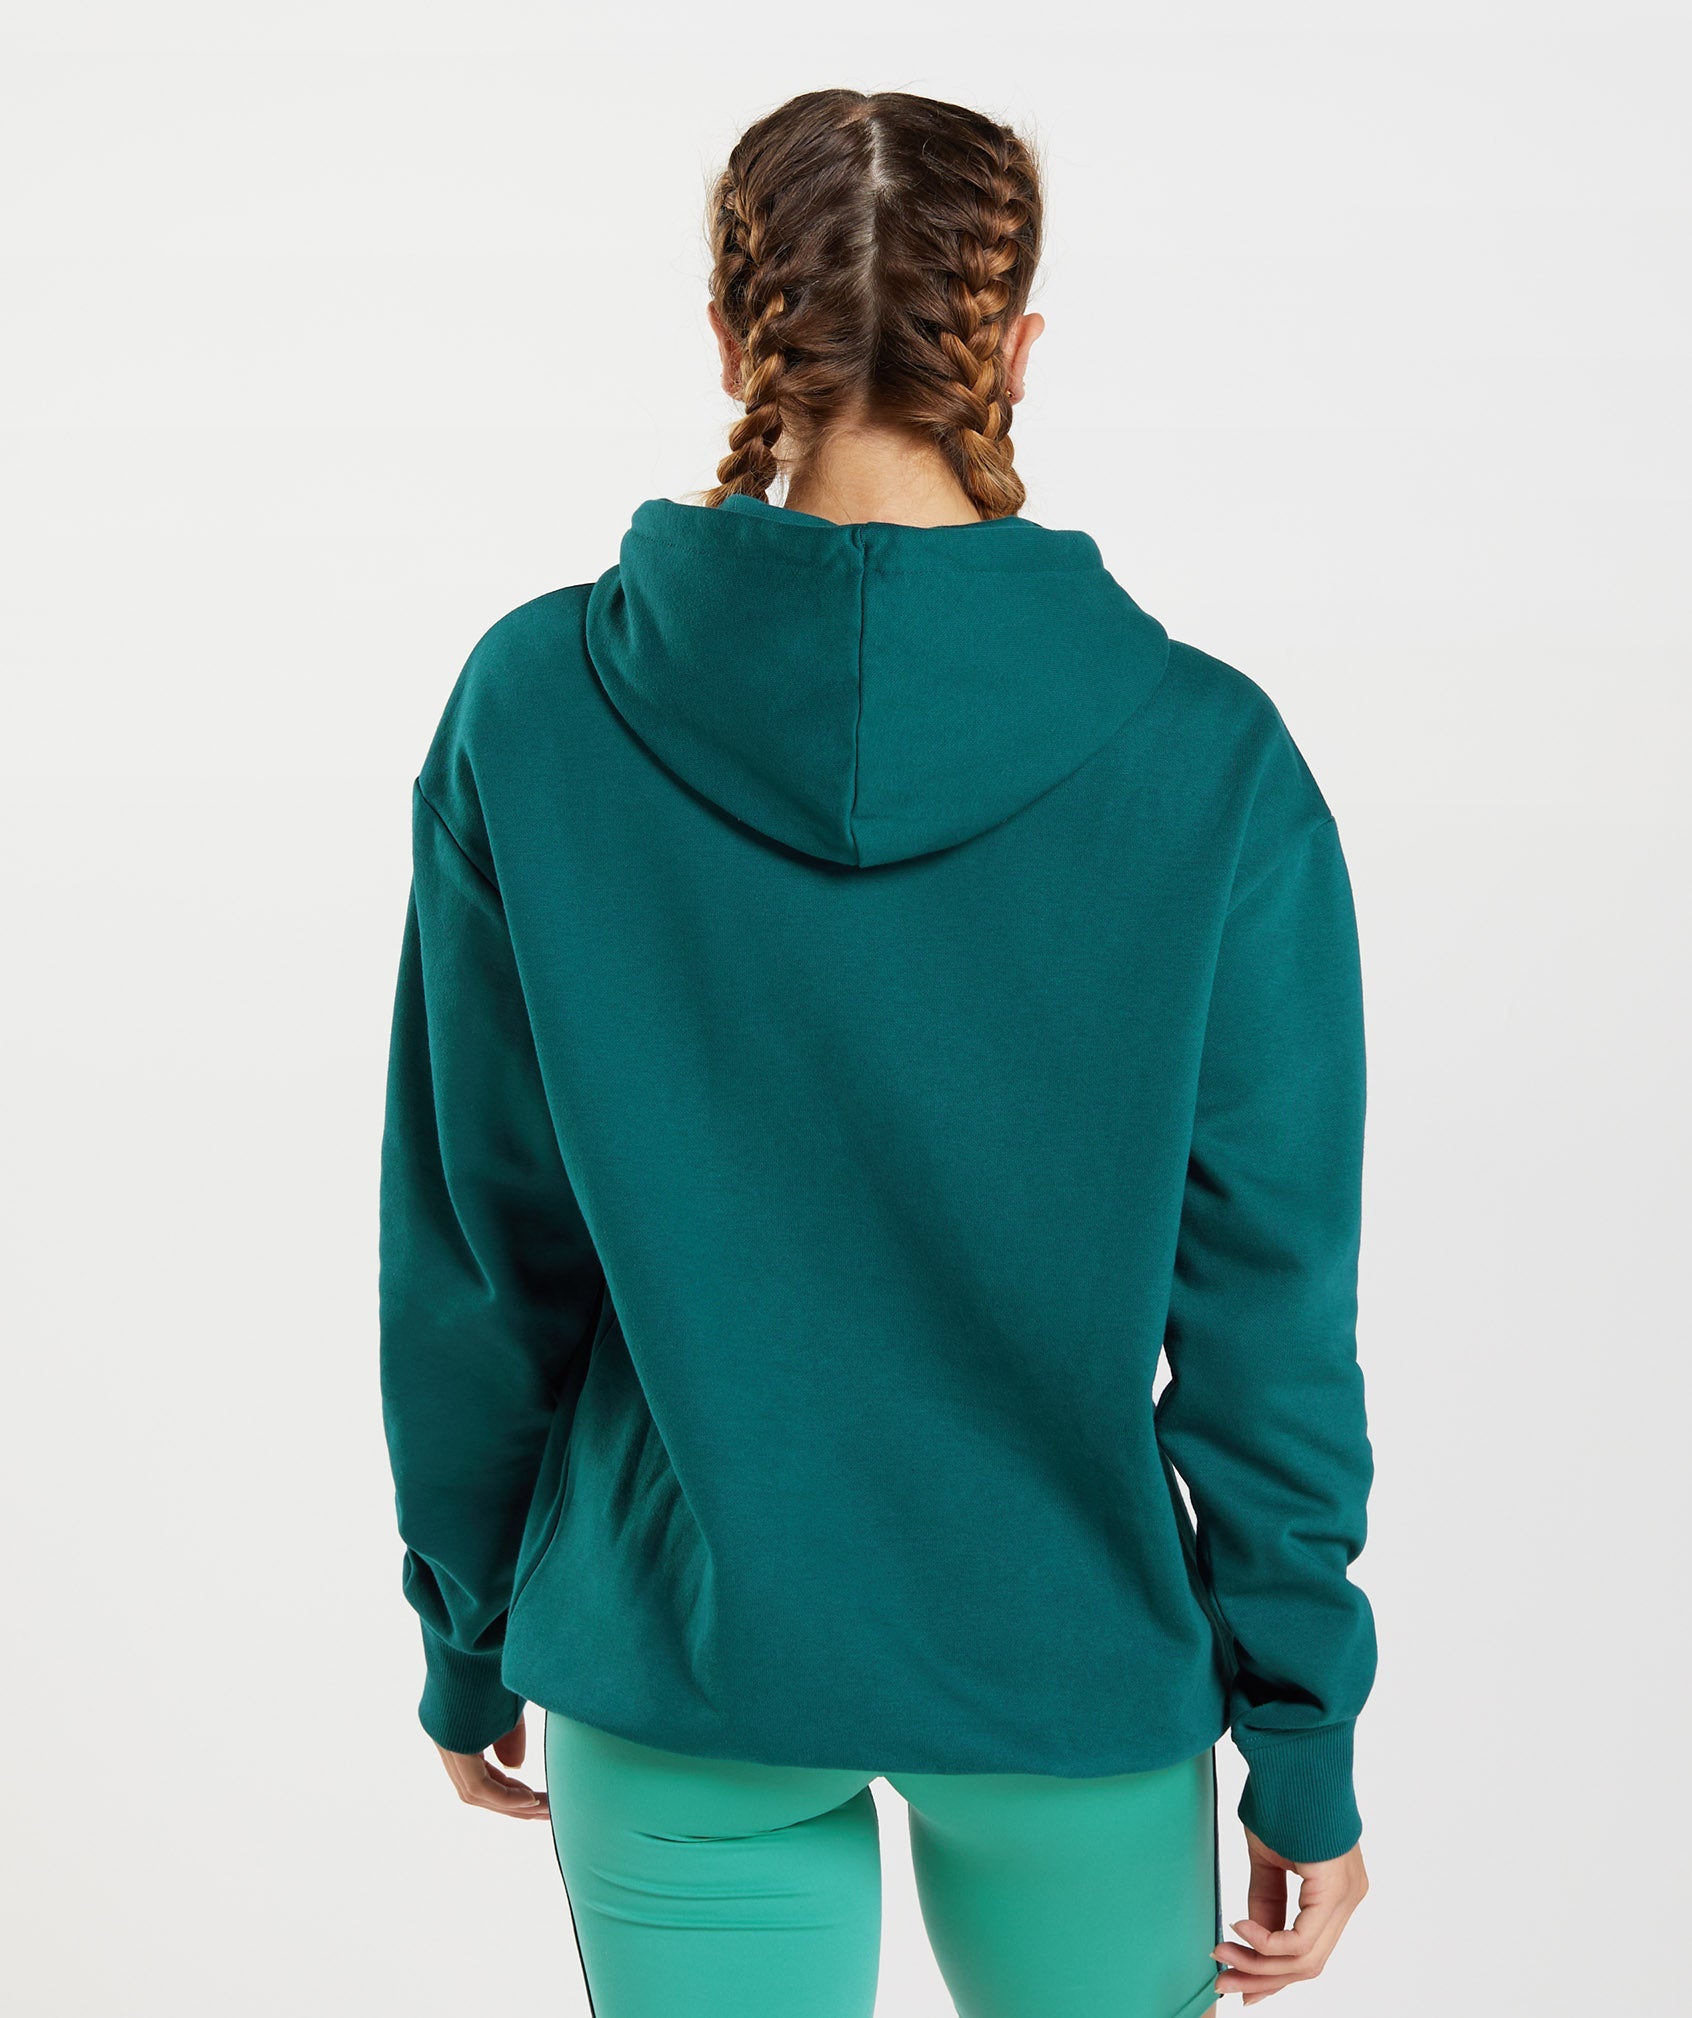 Training Oversized Hoodie in Winter Teal - view 2